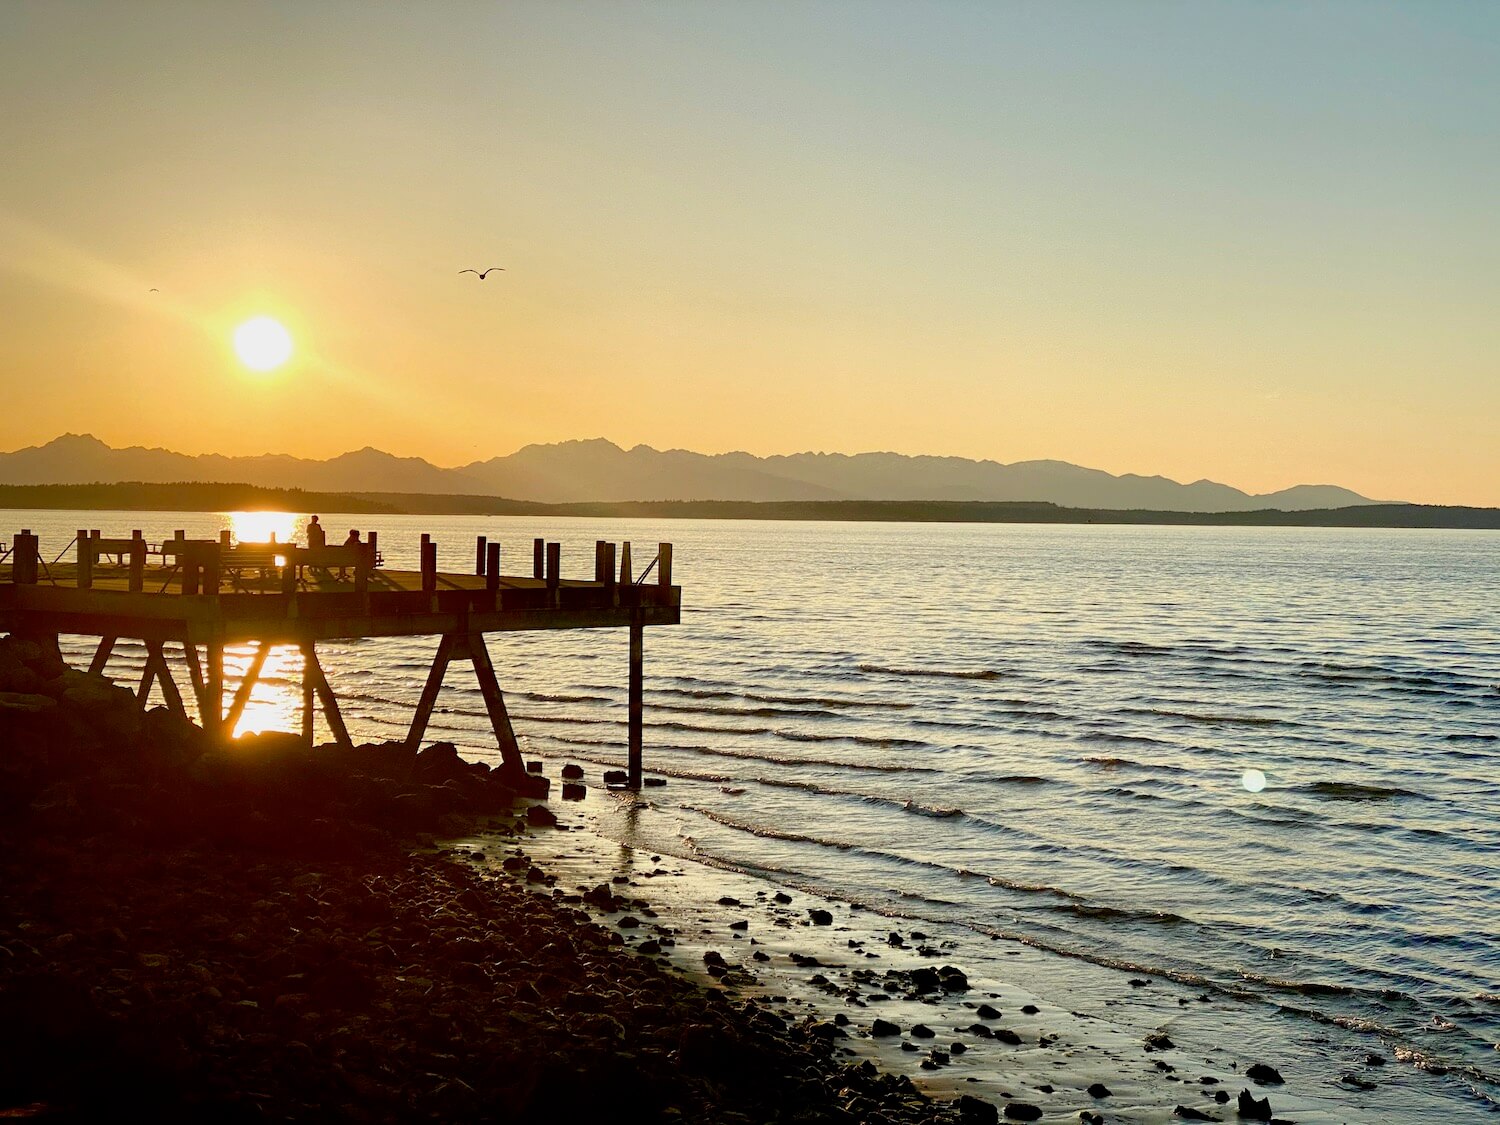 Beautiful spring sunset from Alki Beach in West Seattle. The light waves wash up onto a rocky beach while the pier juts out into the water. The Olympic Mountains in the distance create a backdrop for the peach, yellow and blue colors of the sky with a bright yellow ball of sun getting ready to set.